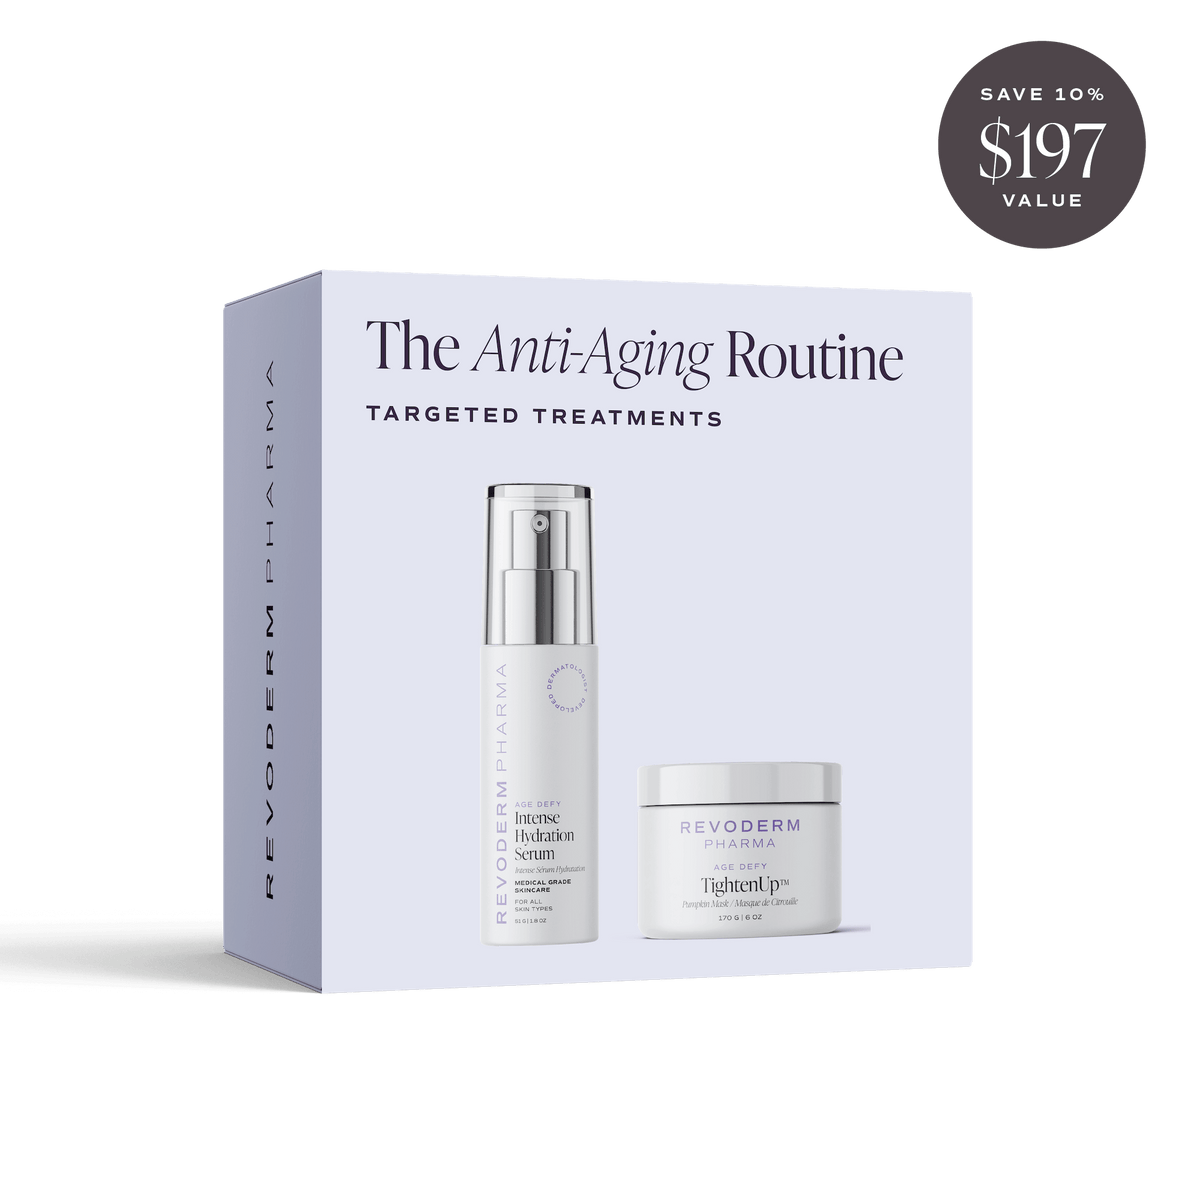 Targeted Treatment Duo: Anti-Aging